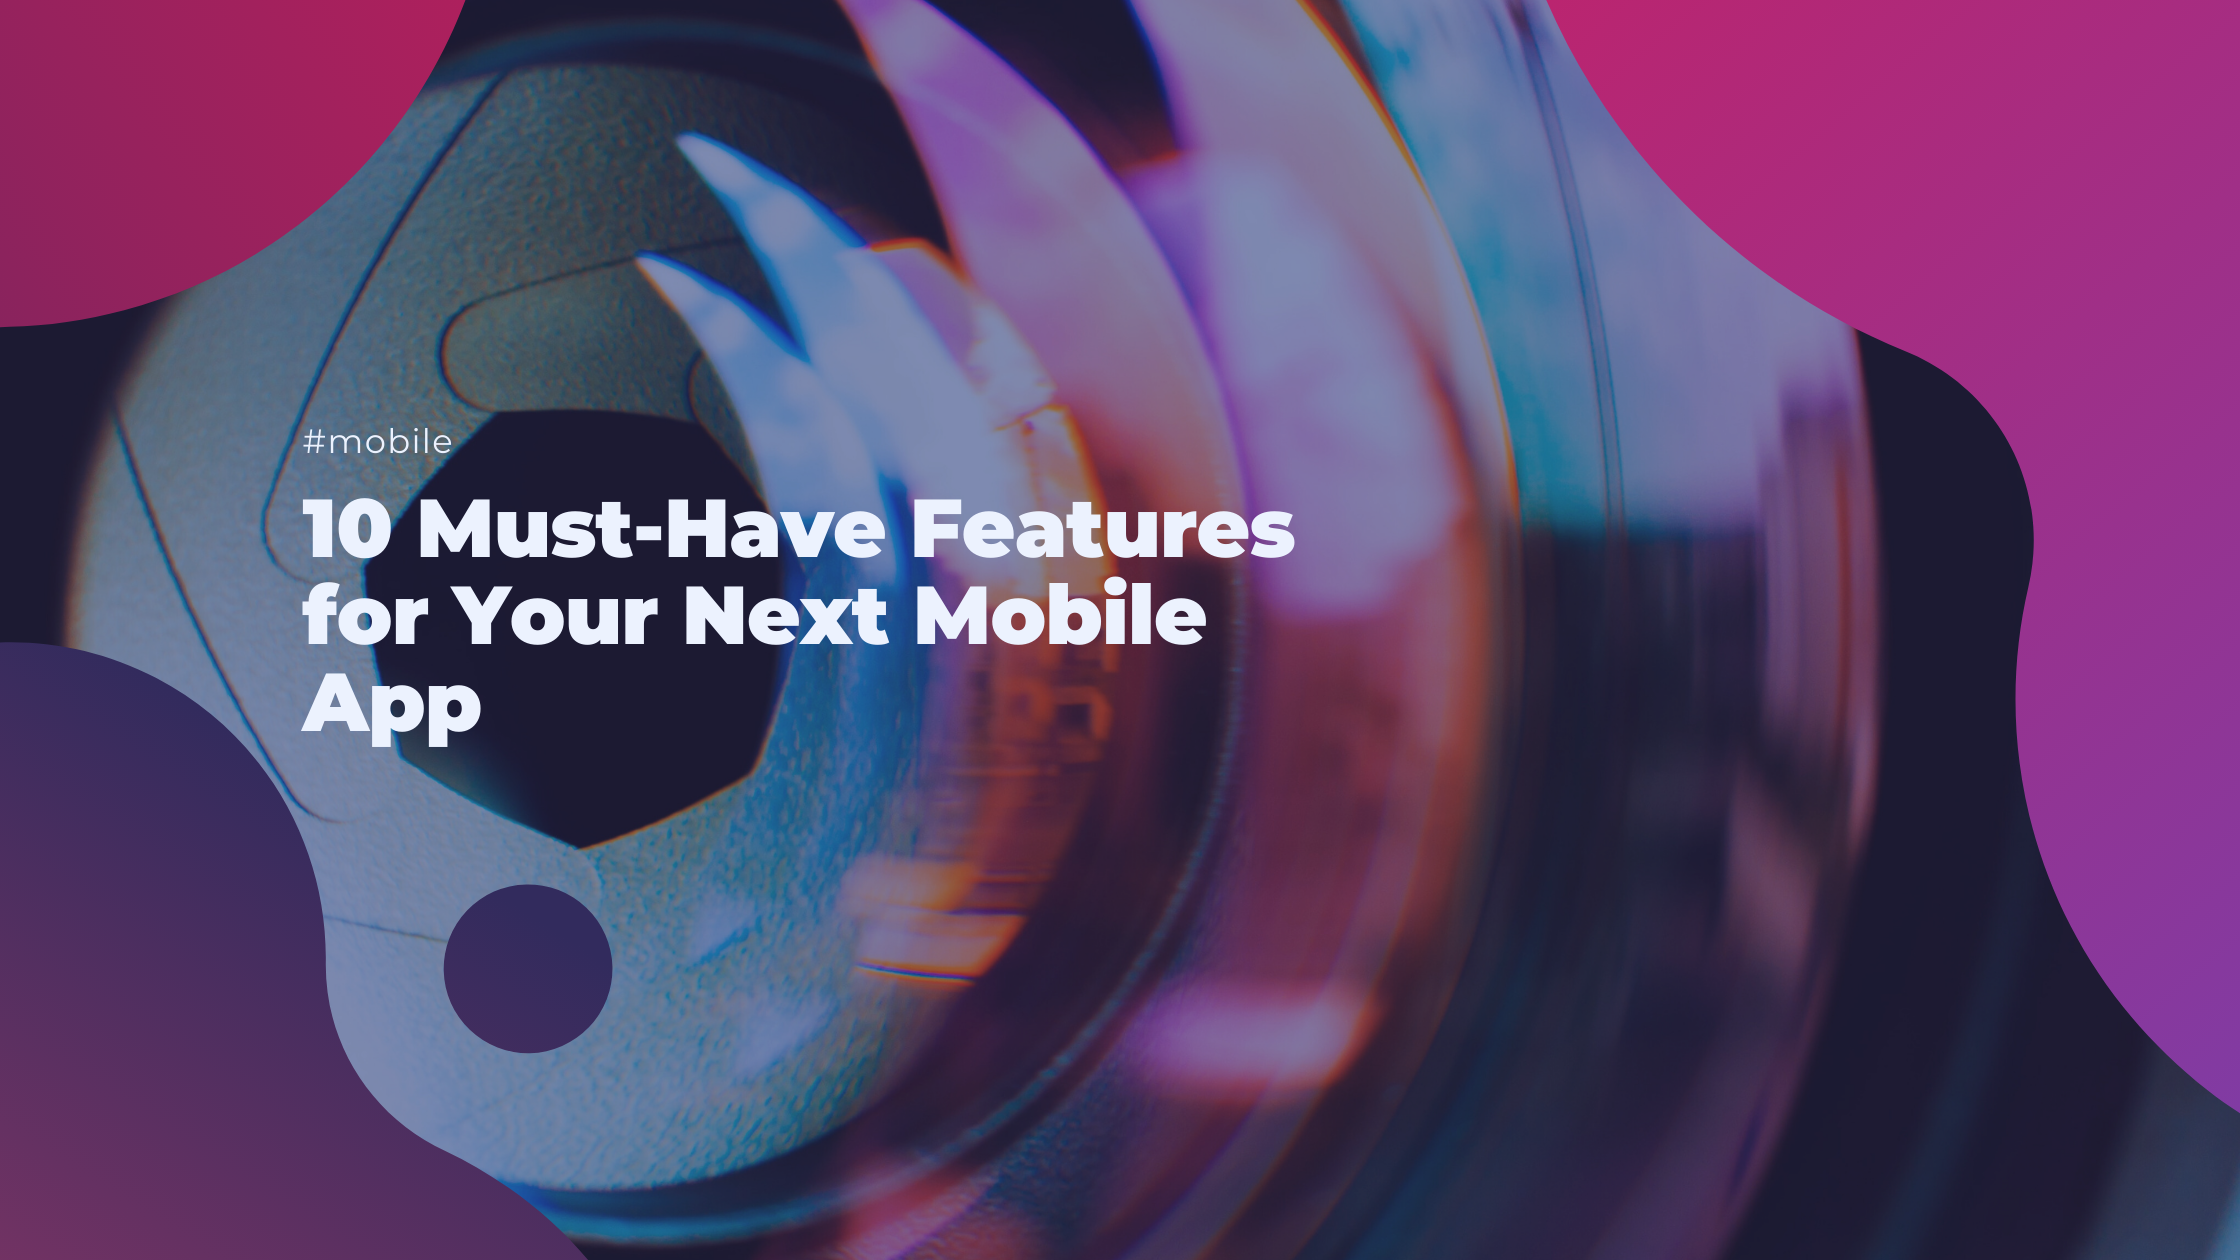 10 Must-Have Features for Your Next Mobile App